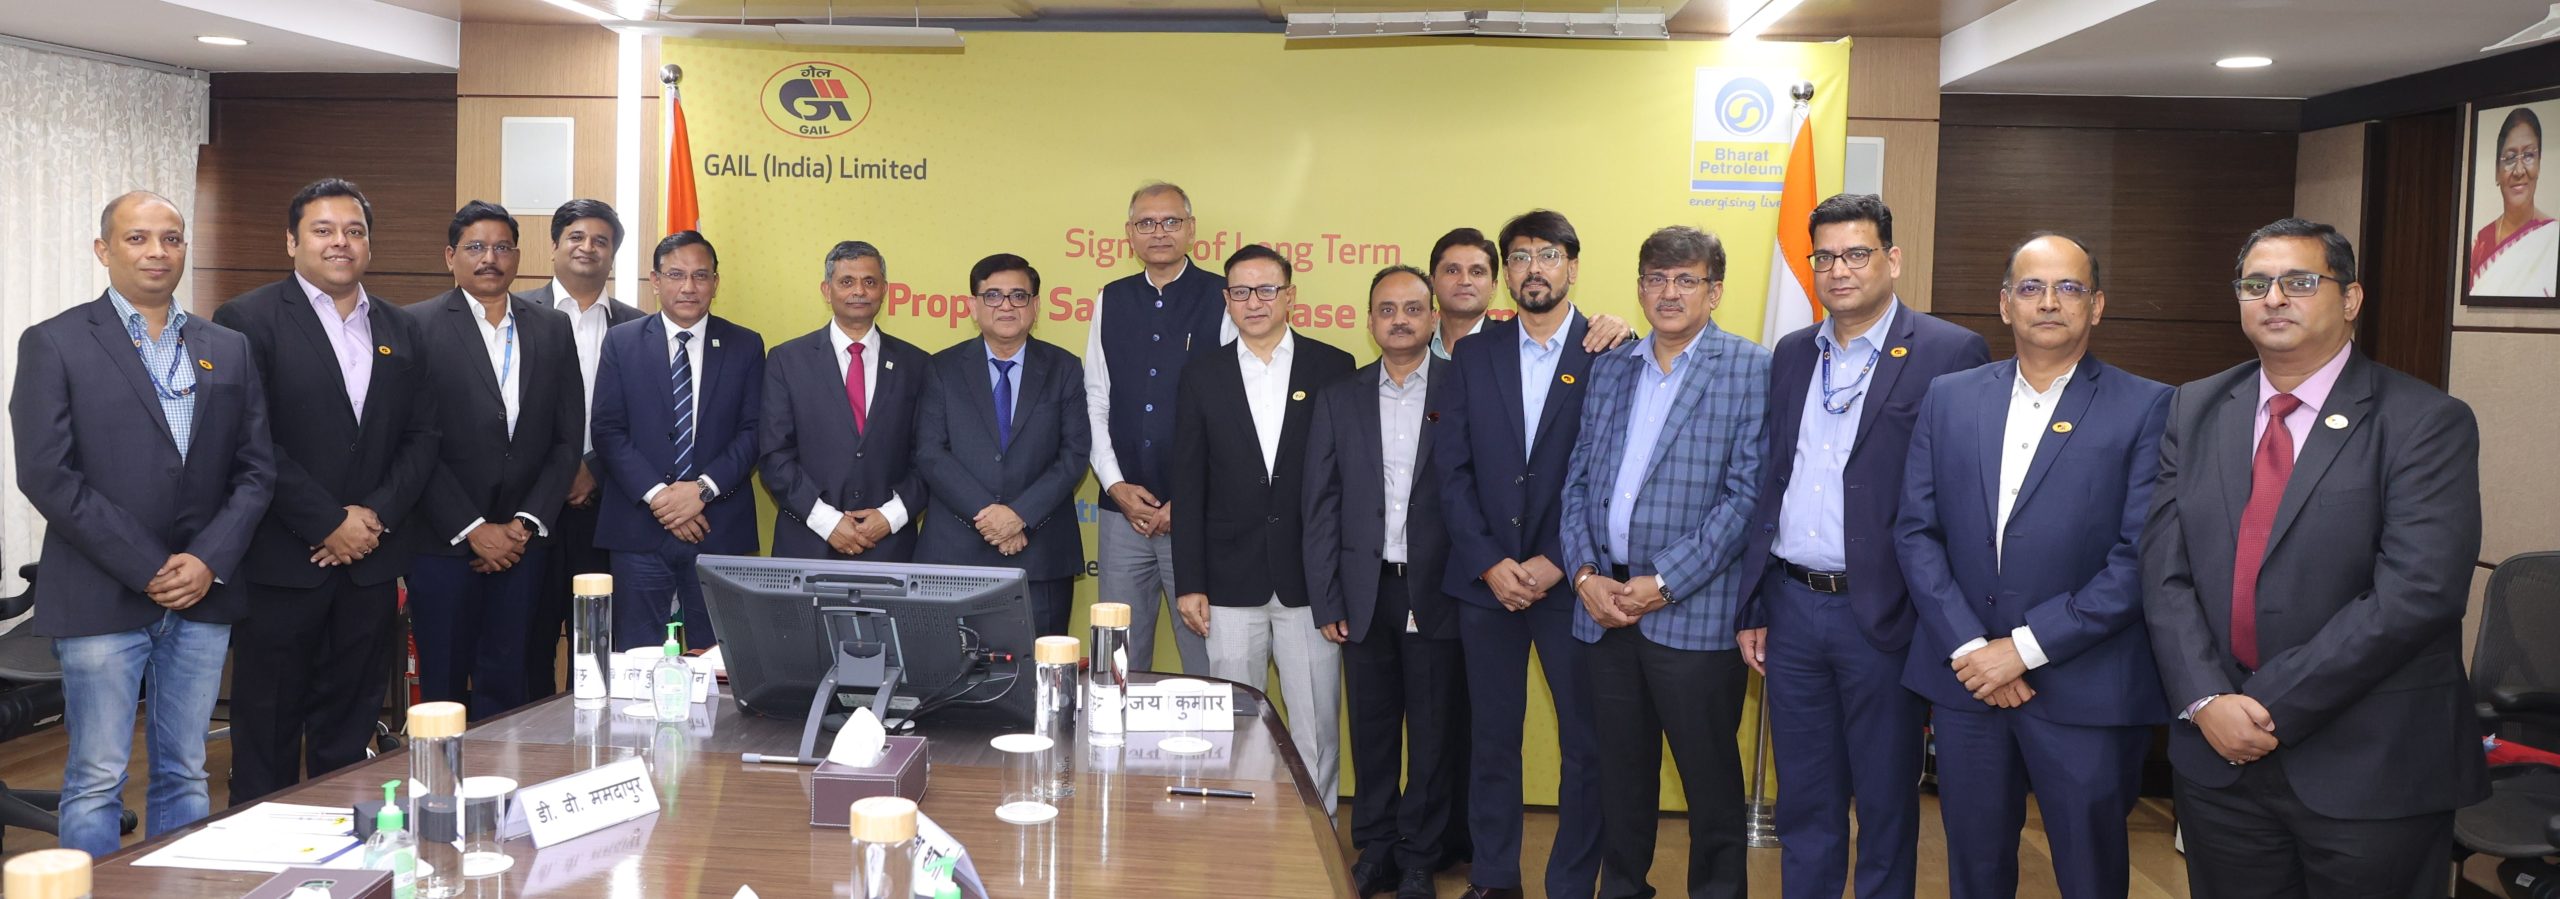 GAIL and BPCL sign agreement for supply of Propane for GAIL’s Petrochemical Plant at Usar 15-year supply commitment to have estimate value of Rs. 63,000 crore